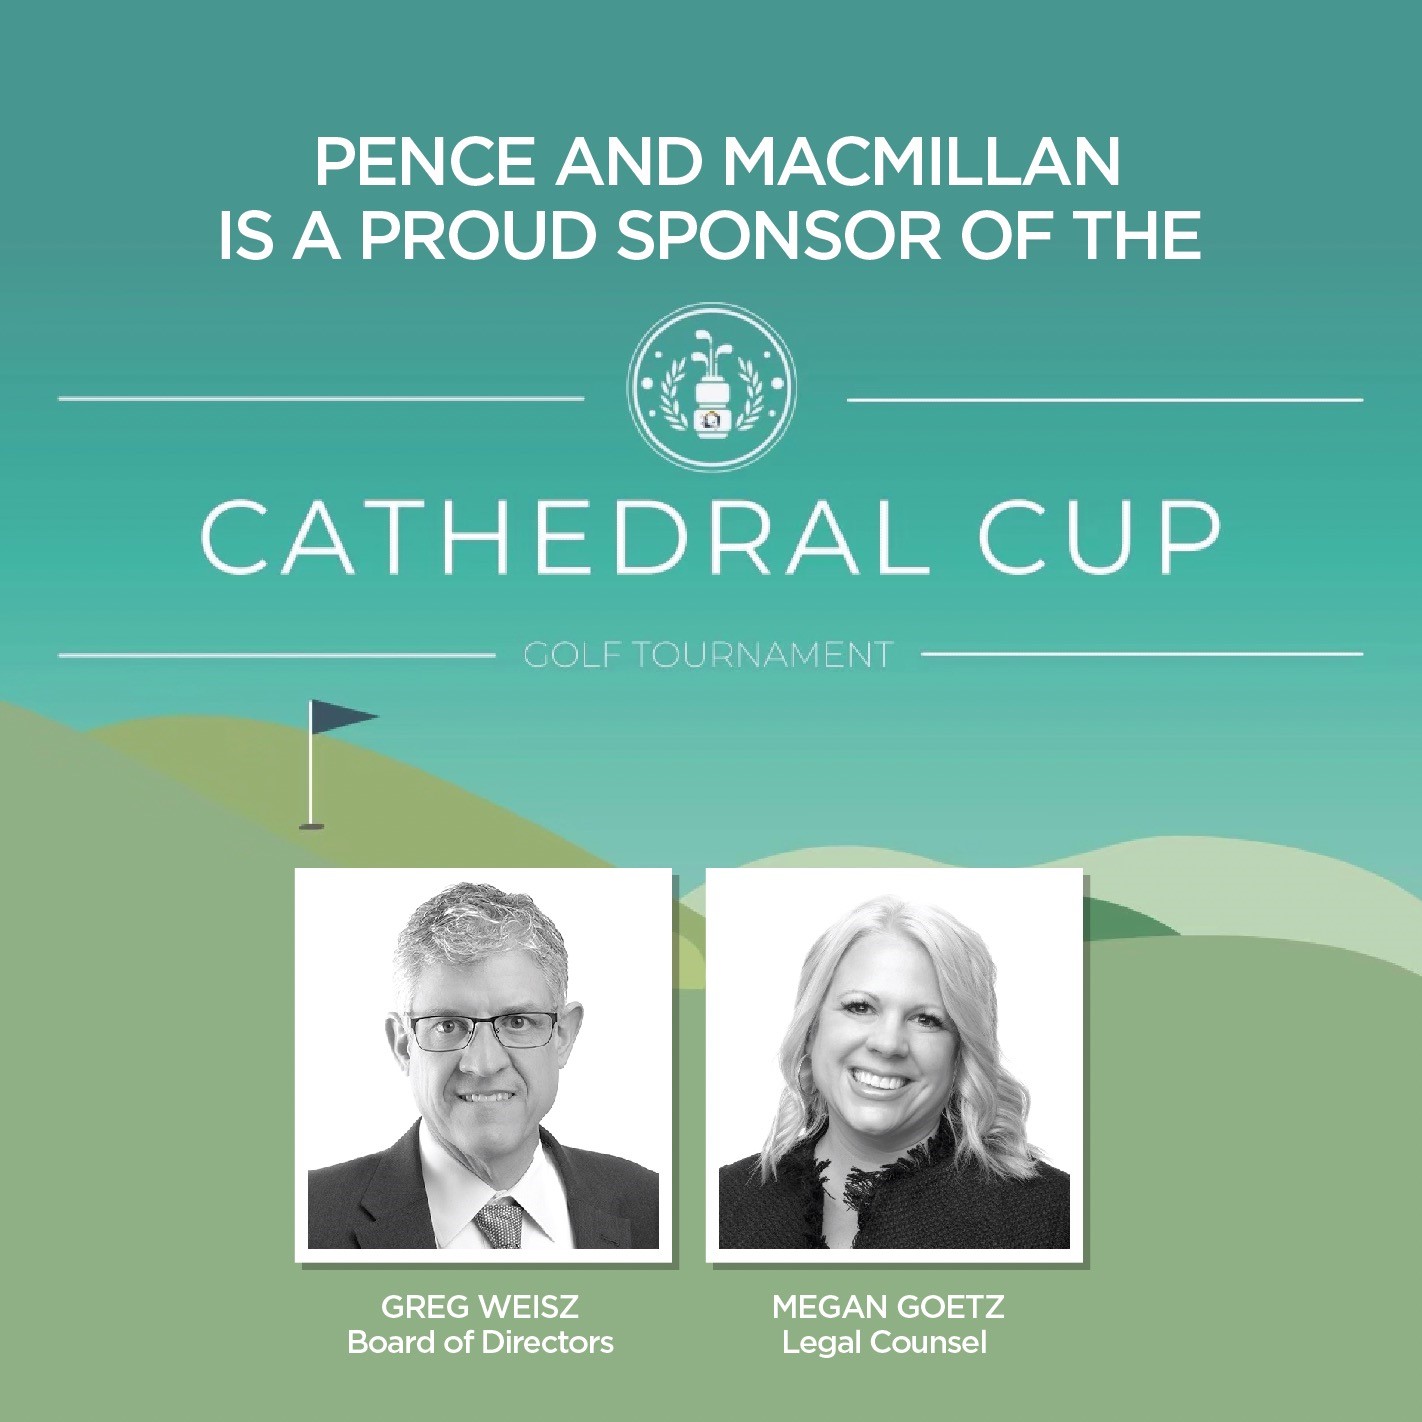 Pence and MacMillan is a proud sponsor of the Cathedral Cup Golf Tournament